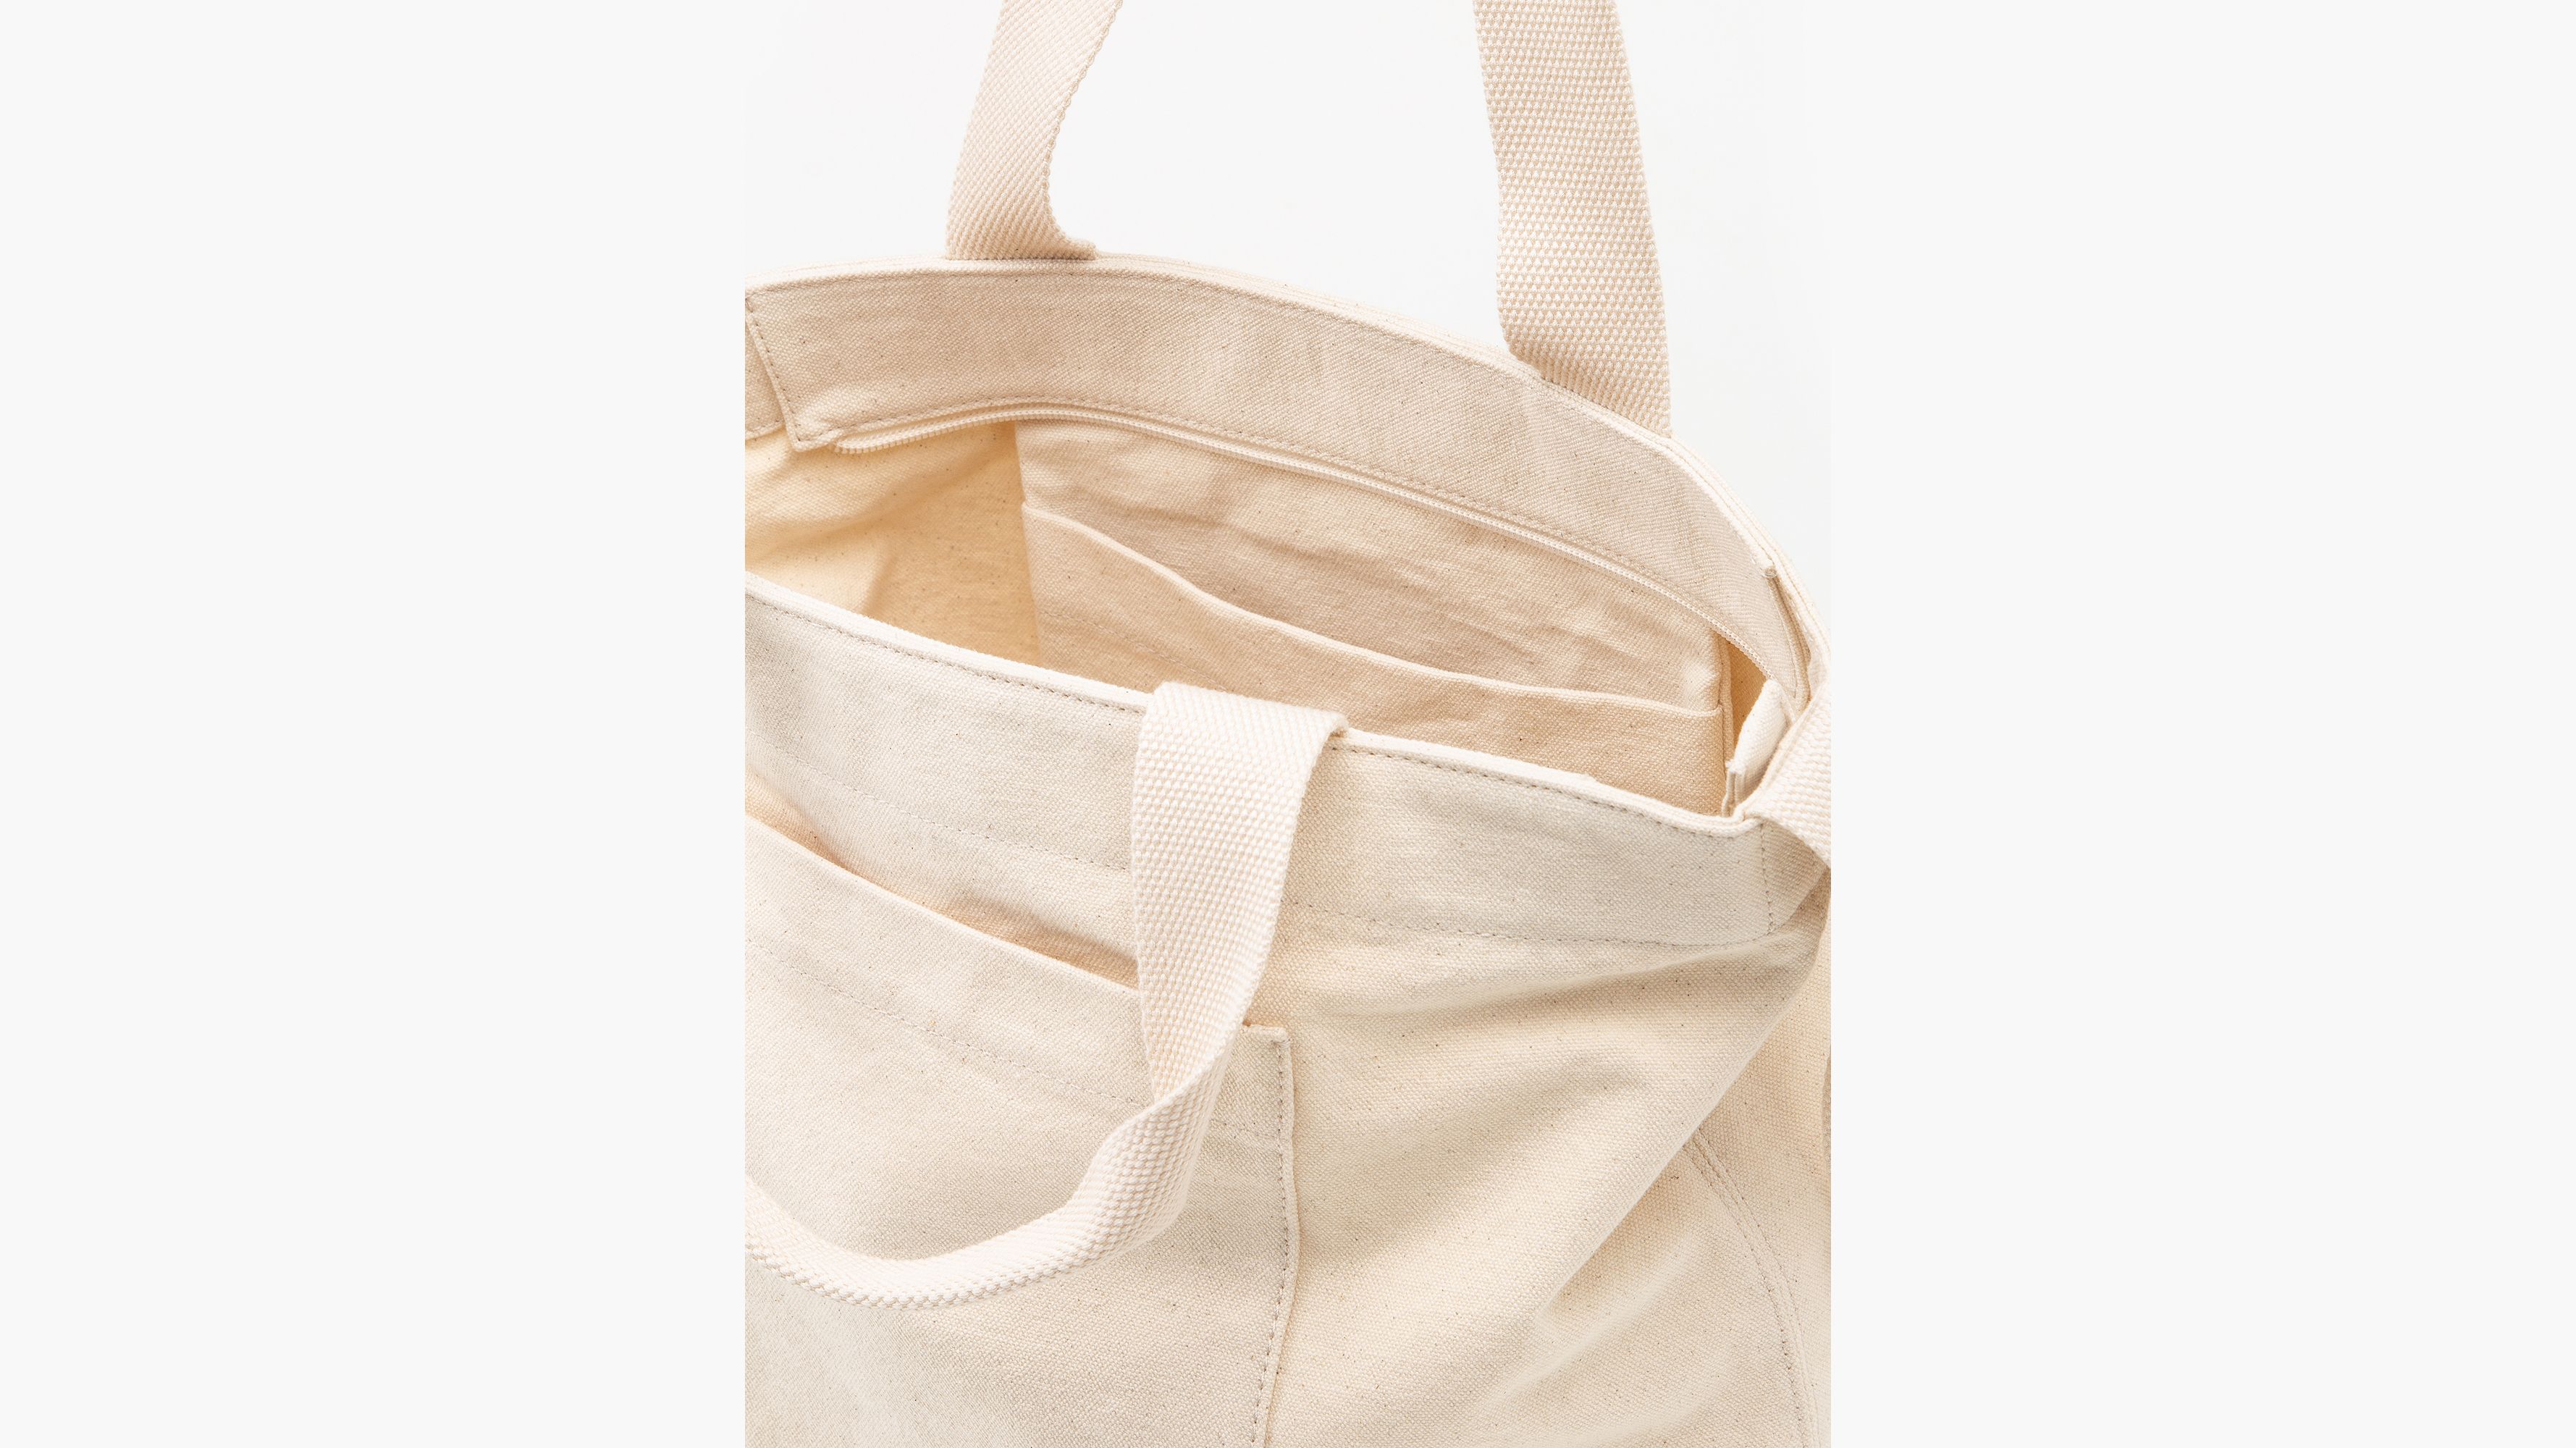 Levi's® Icon Carryall Clear Tote Bag - White